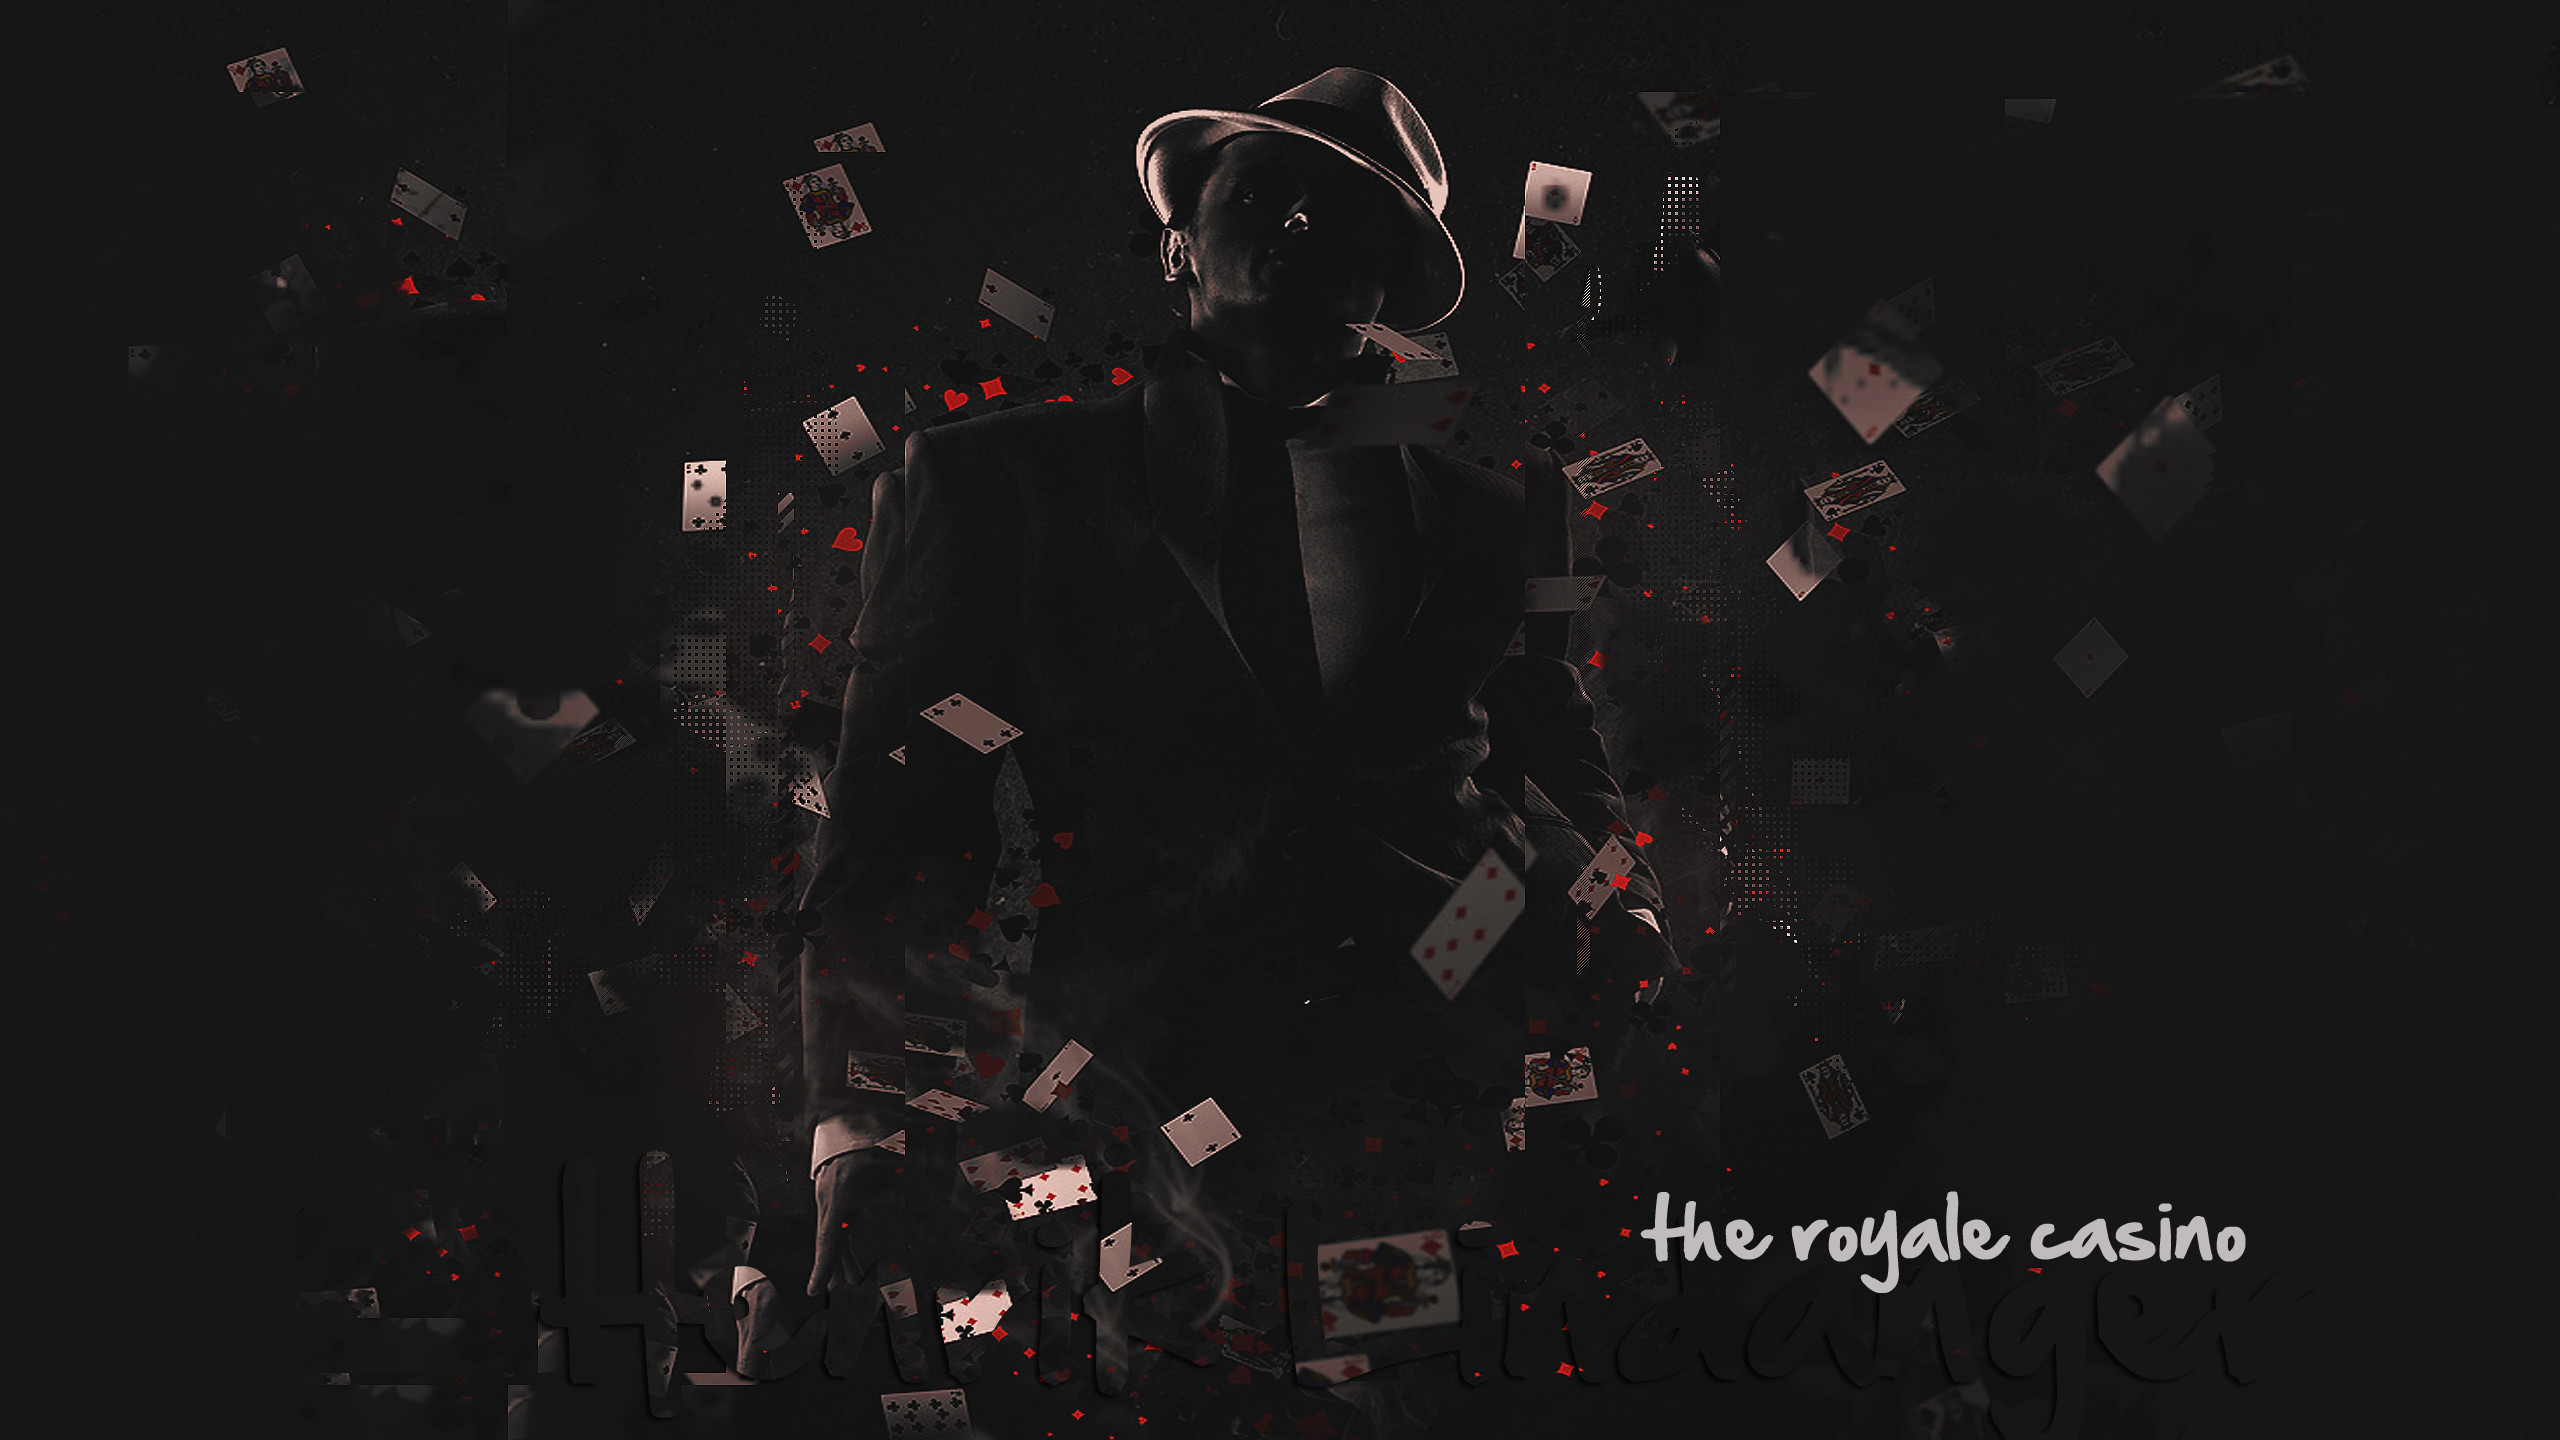 2560x1440 The royale casino Wallpaper by zhiken The royale casino Wallpaper by zhiken